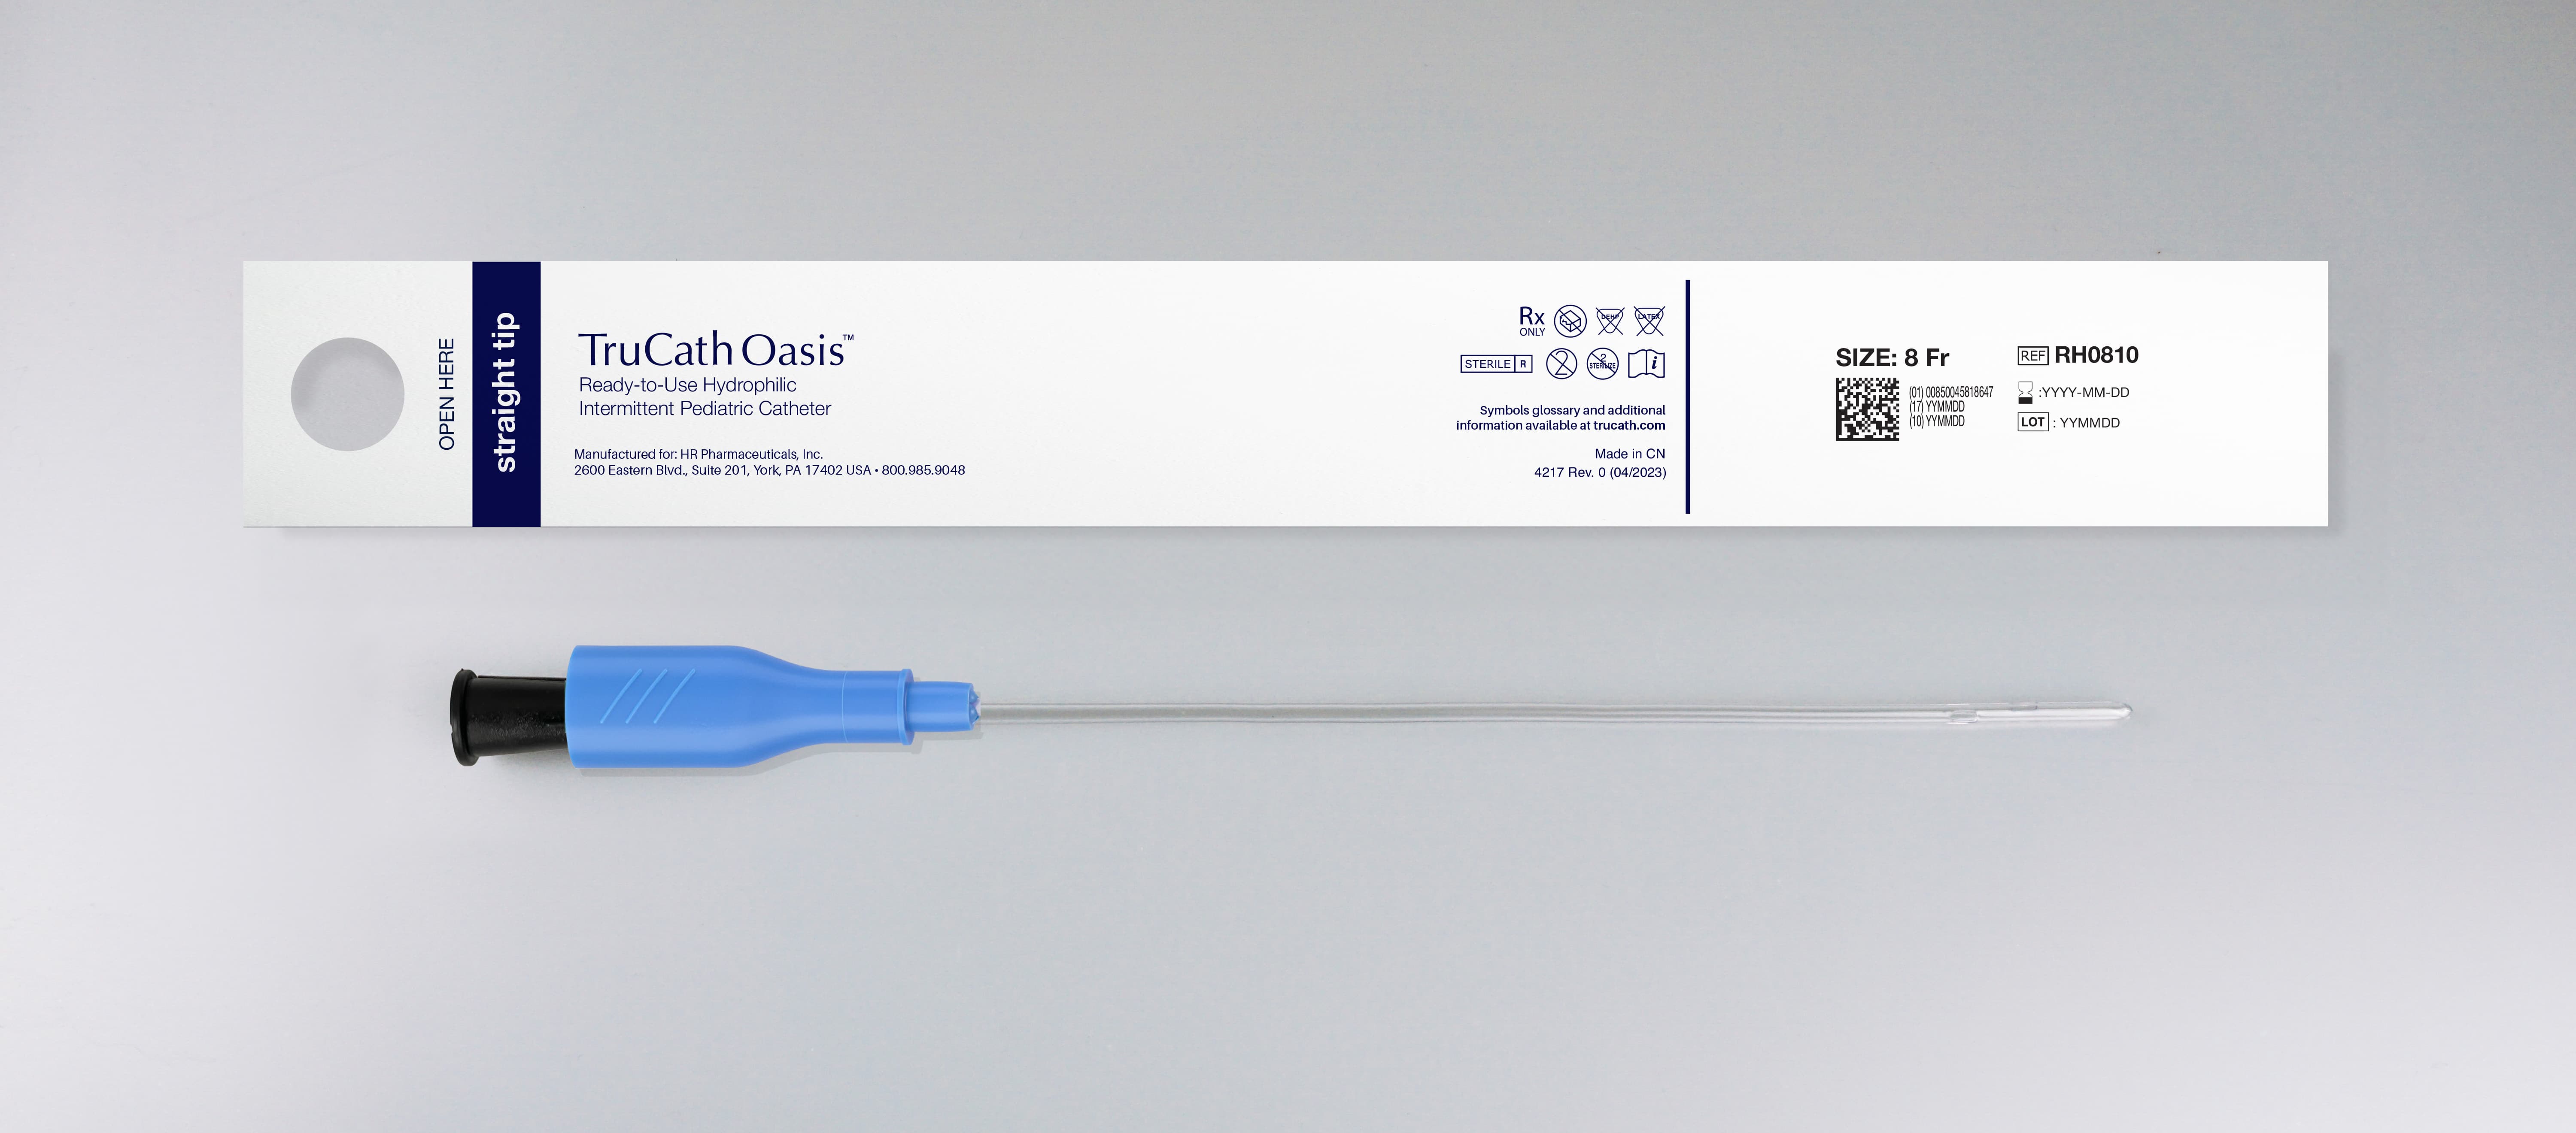 TruCath Oasis™ Ready-to-Use Hydrophilic Intermittent Pediatric Straight Catheter